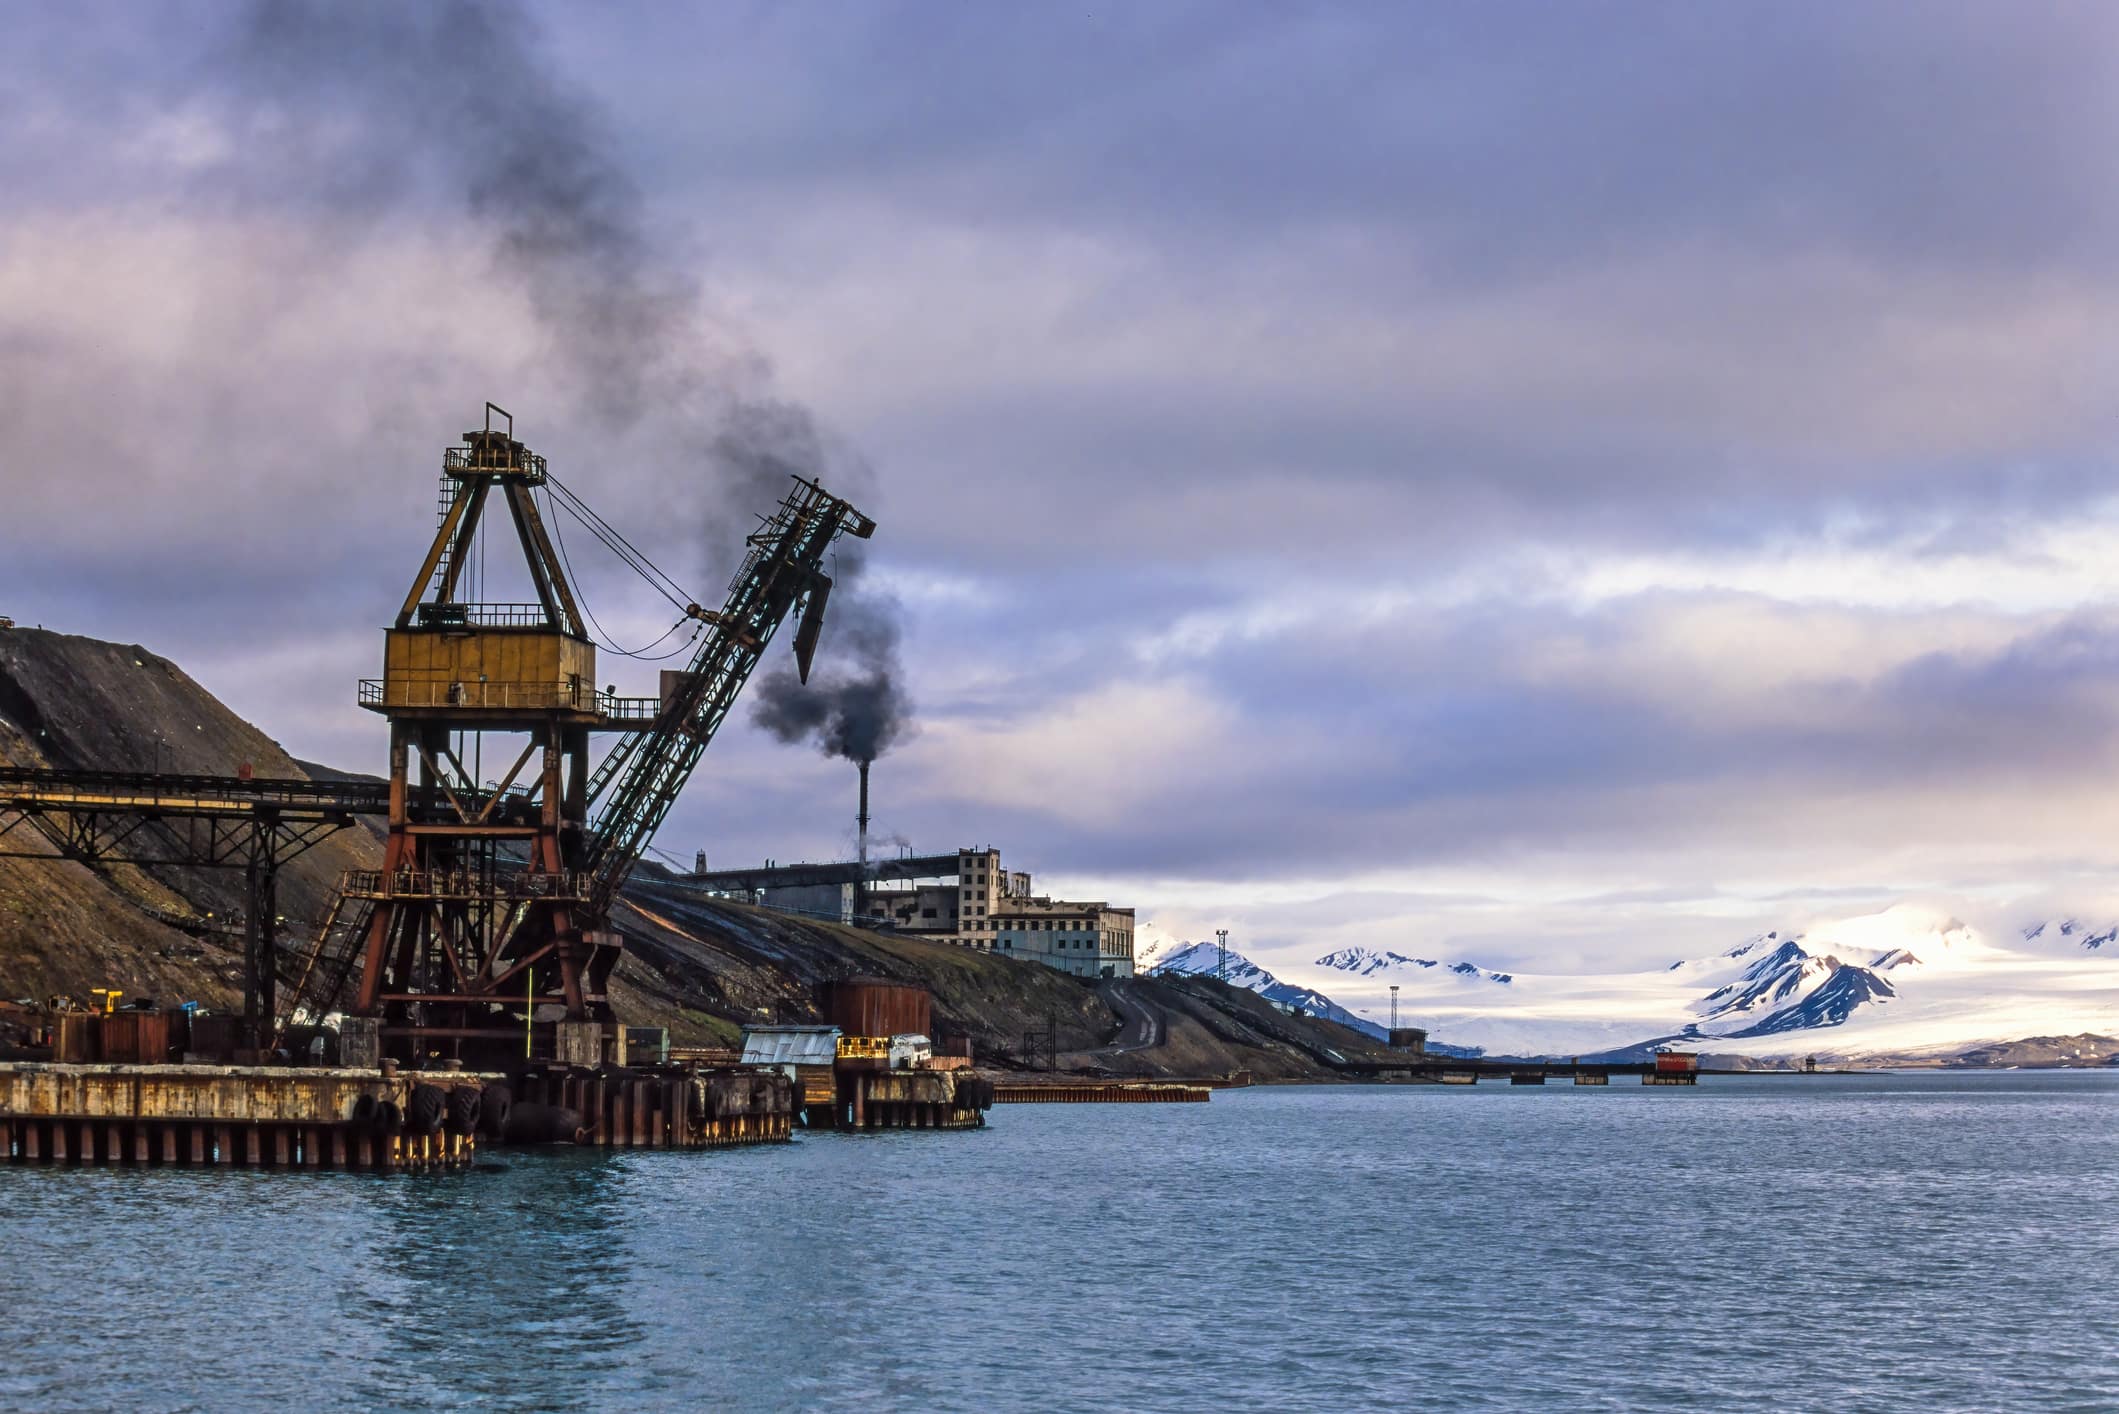 Harbor for a Coal mine in Svalbard archipelago